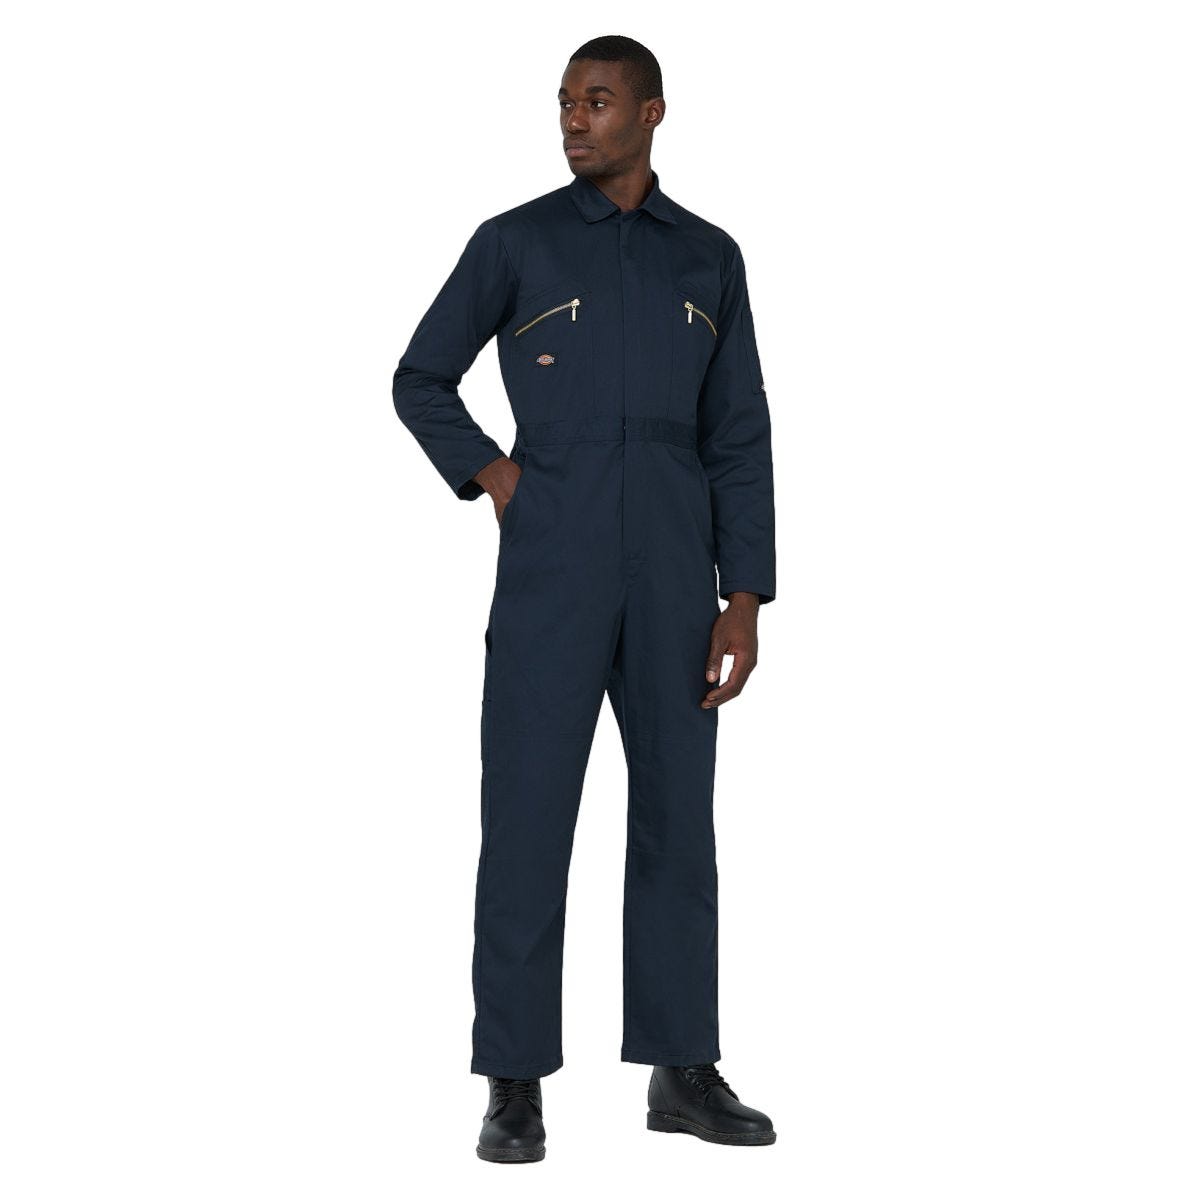 Combinaison Redhawk Coverhall Marine - Dickies - Taille M 2